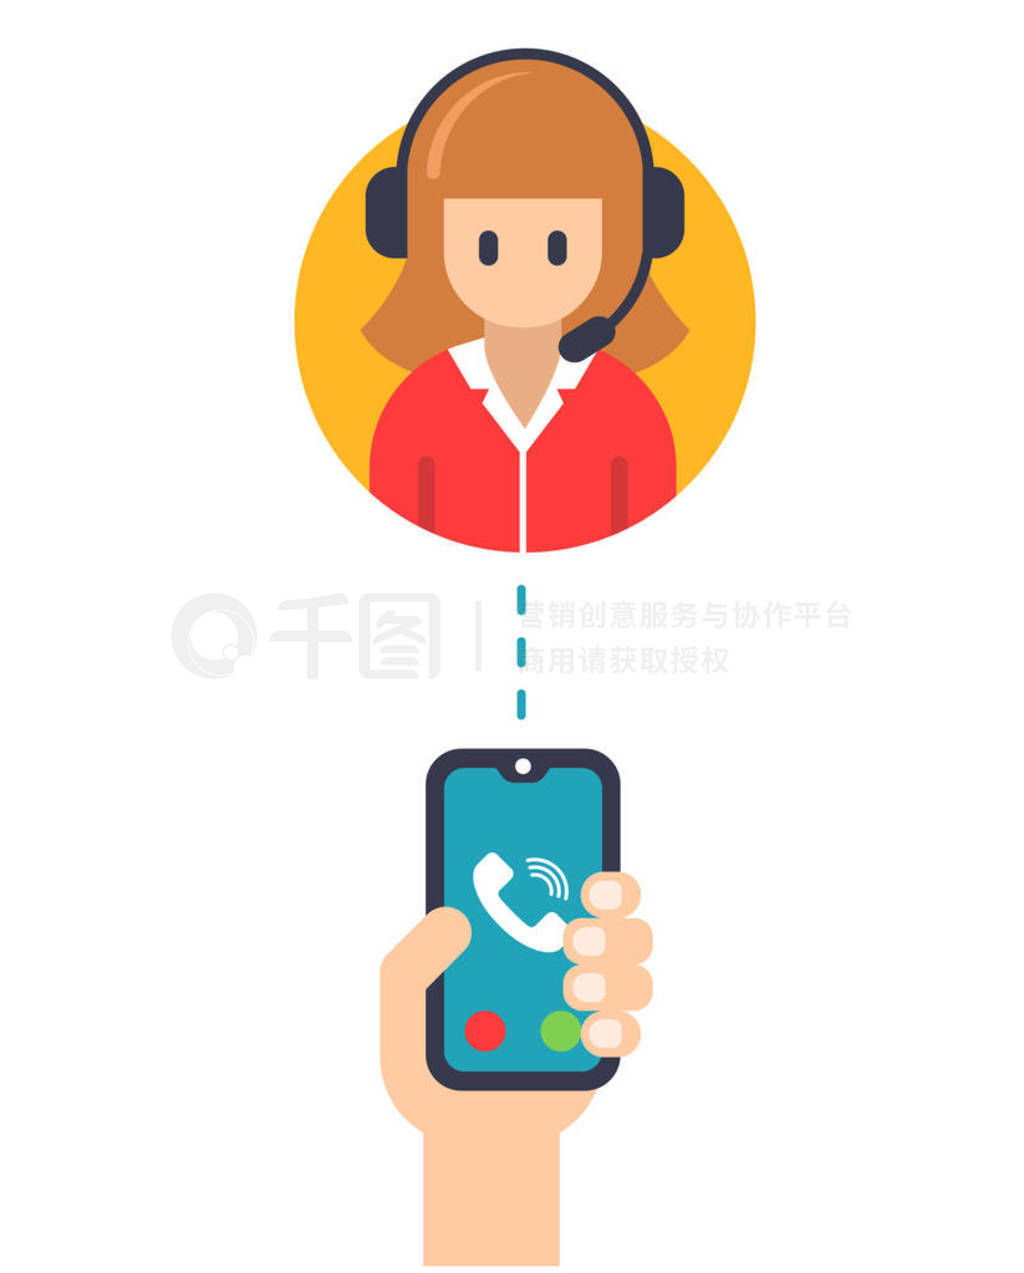 call service manager from a mobile phone.